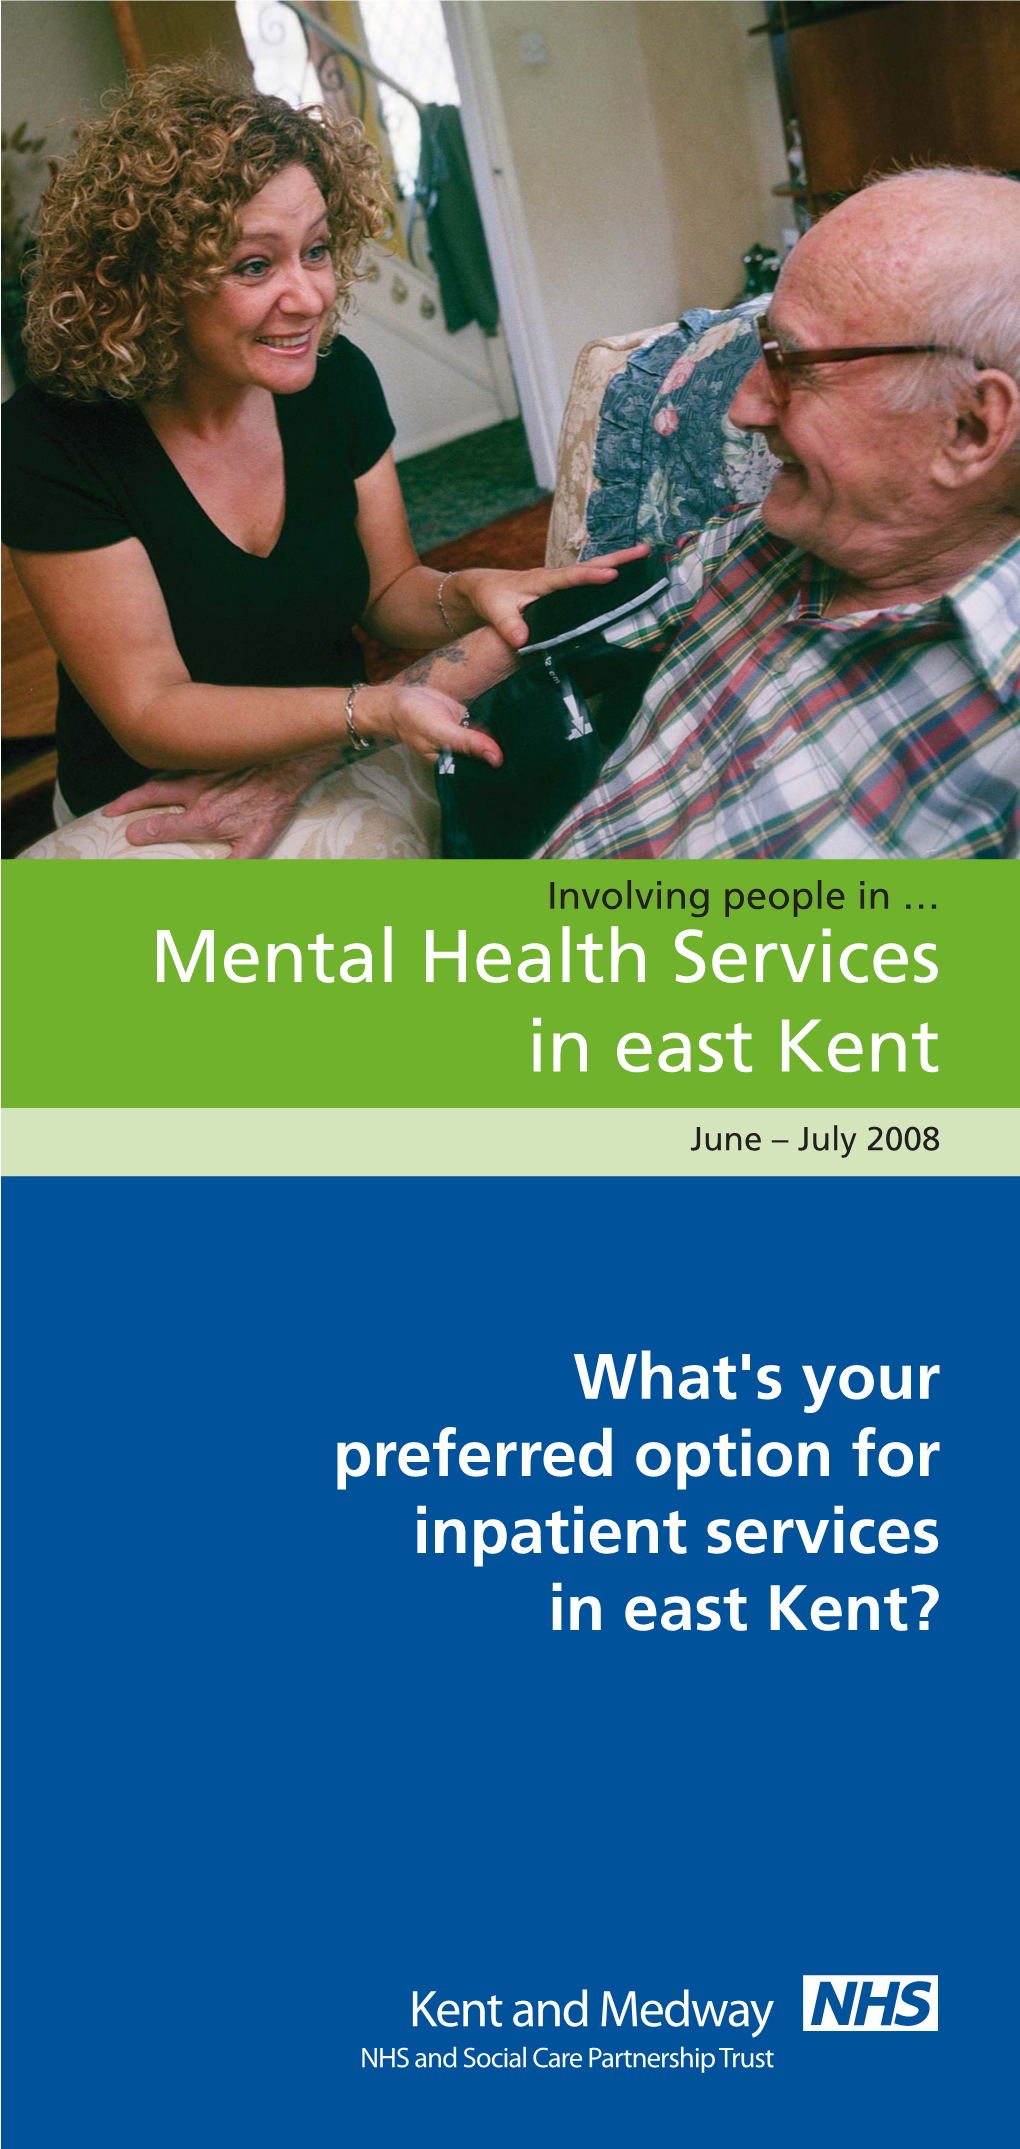 Mental Health Services in East Kent